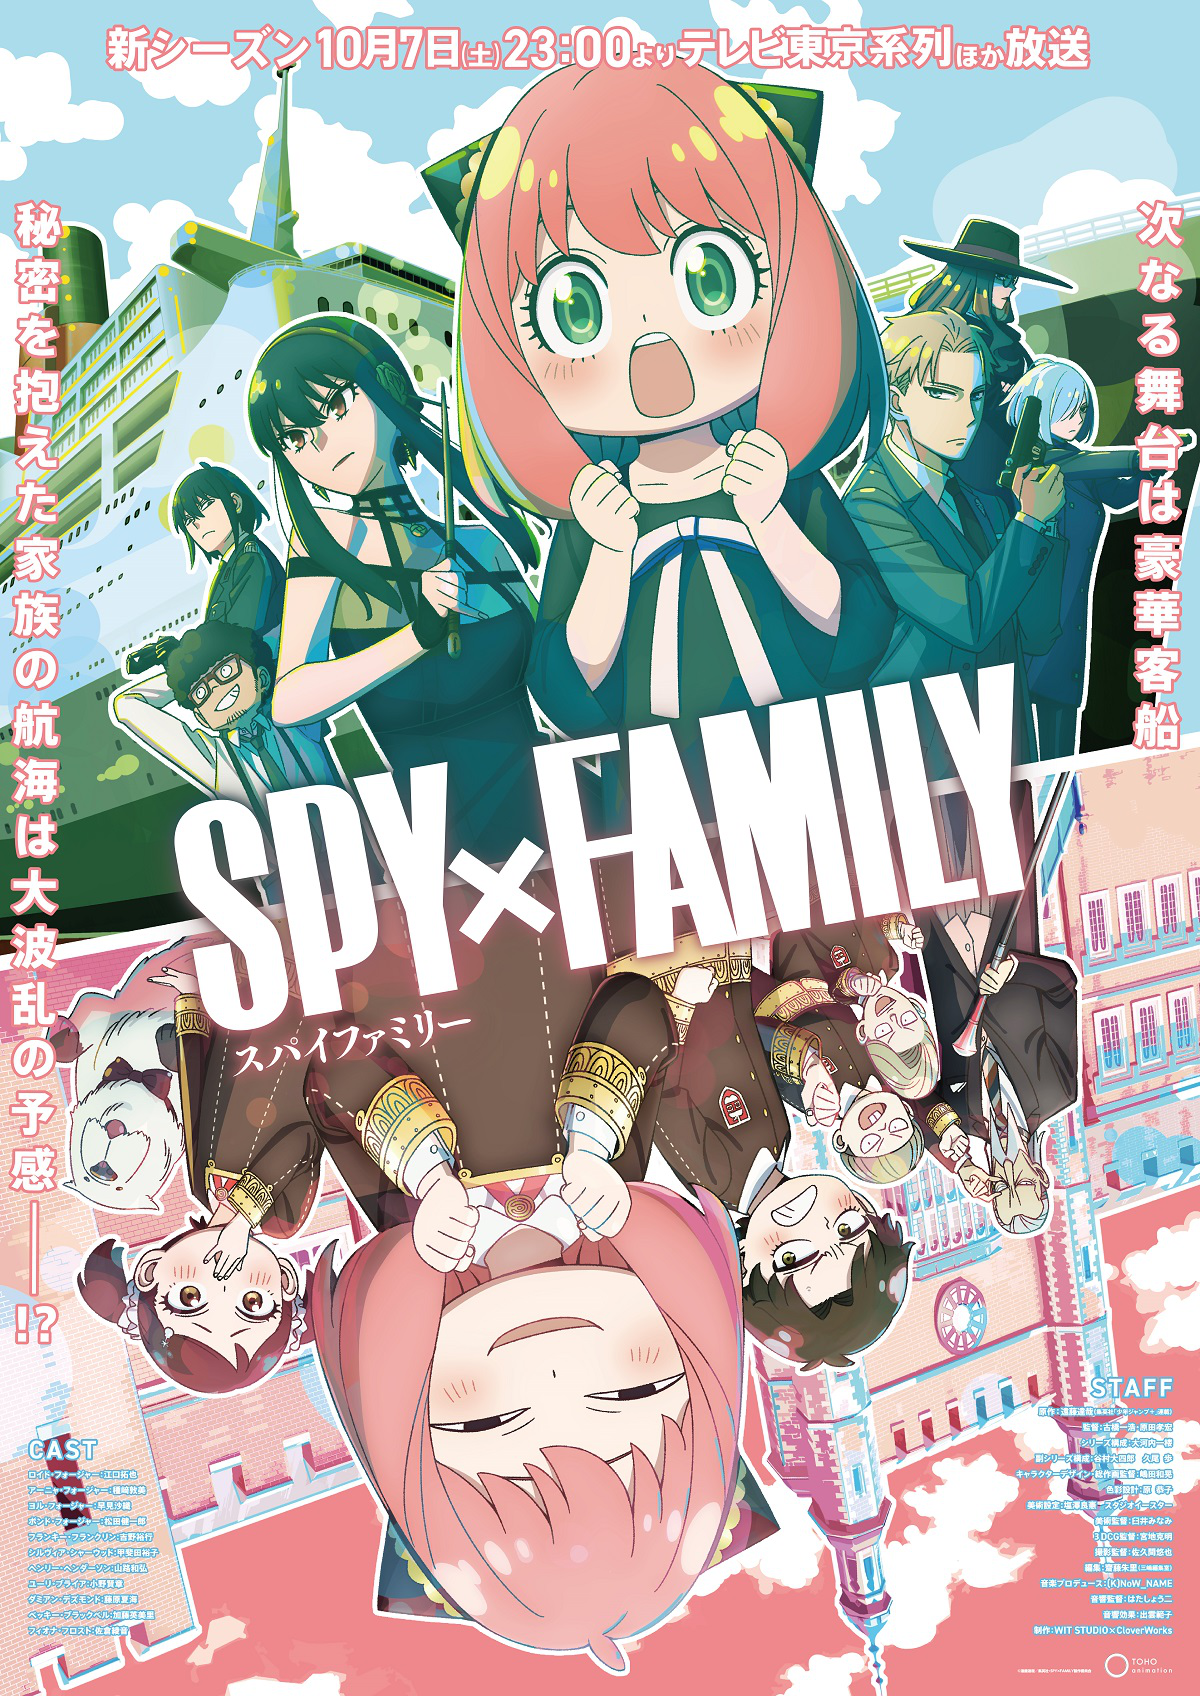 Spy X Family season 2 episode 6: Release date and time, where to